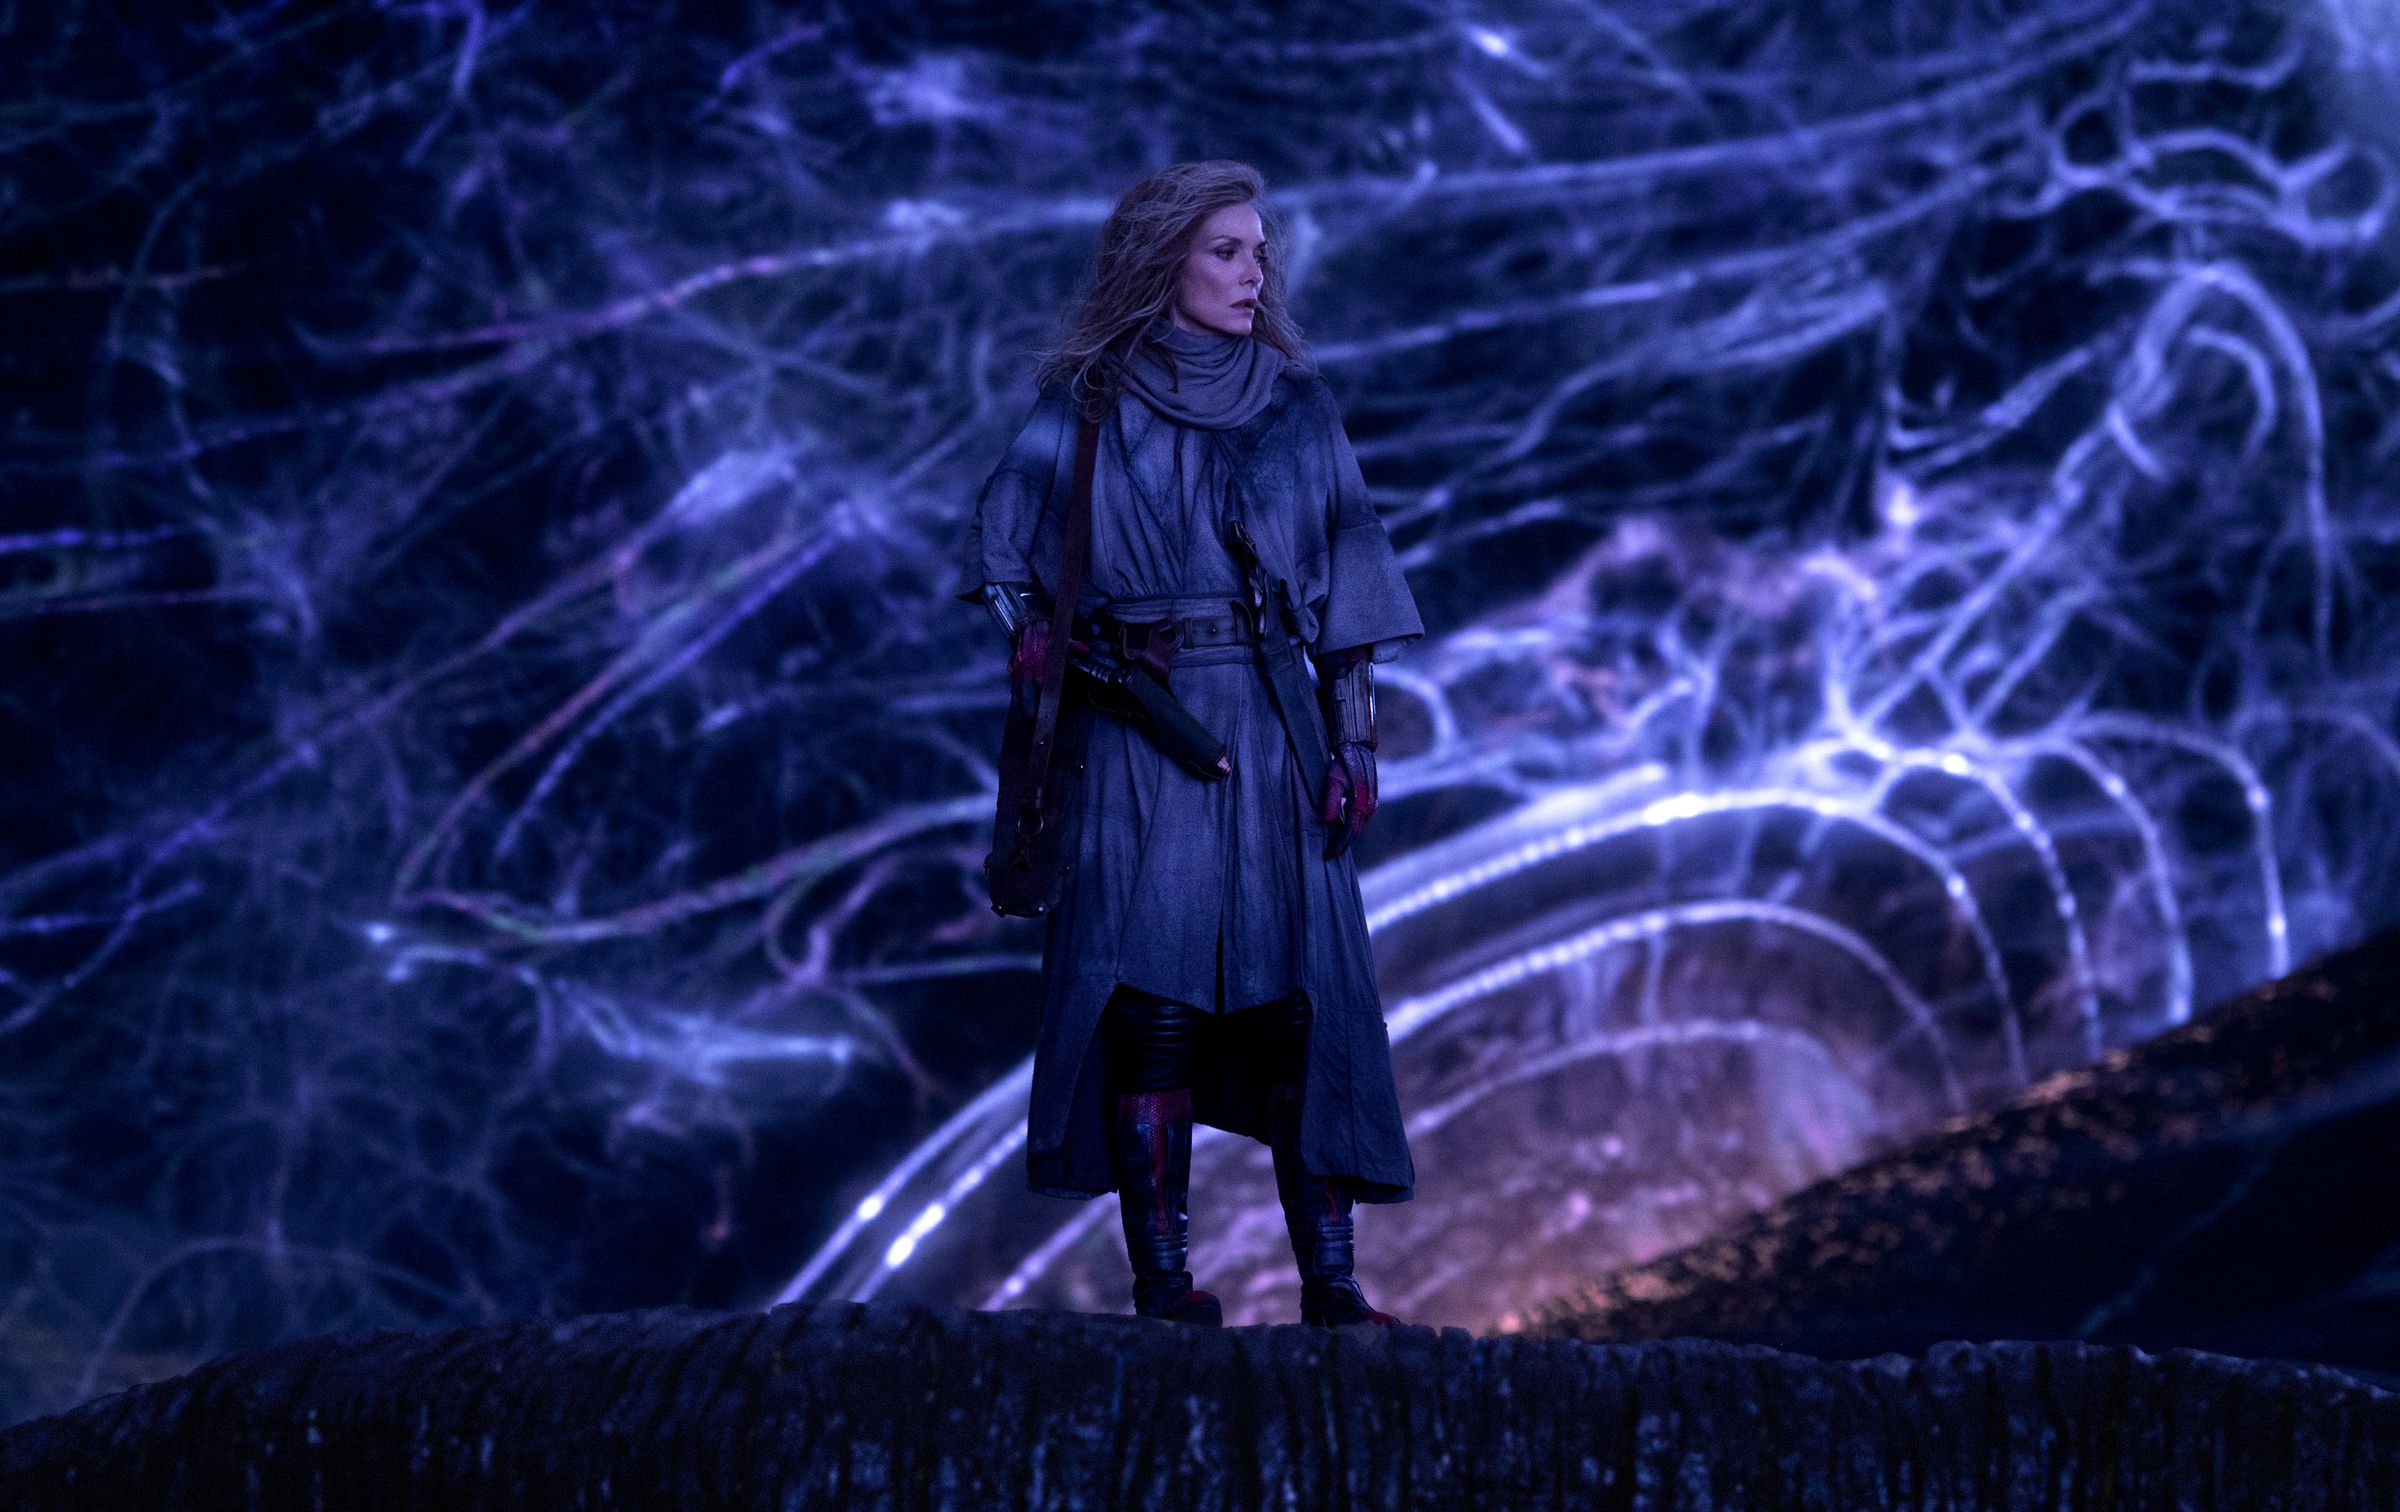 An image of Michelle Pfeiffer as the Wasp, standing in front of a messy glowing purple background.